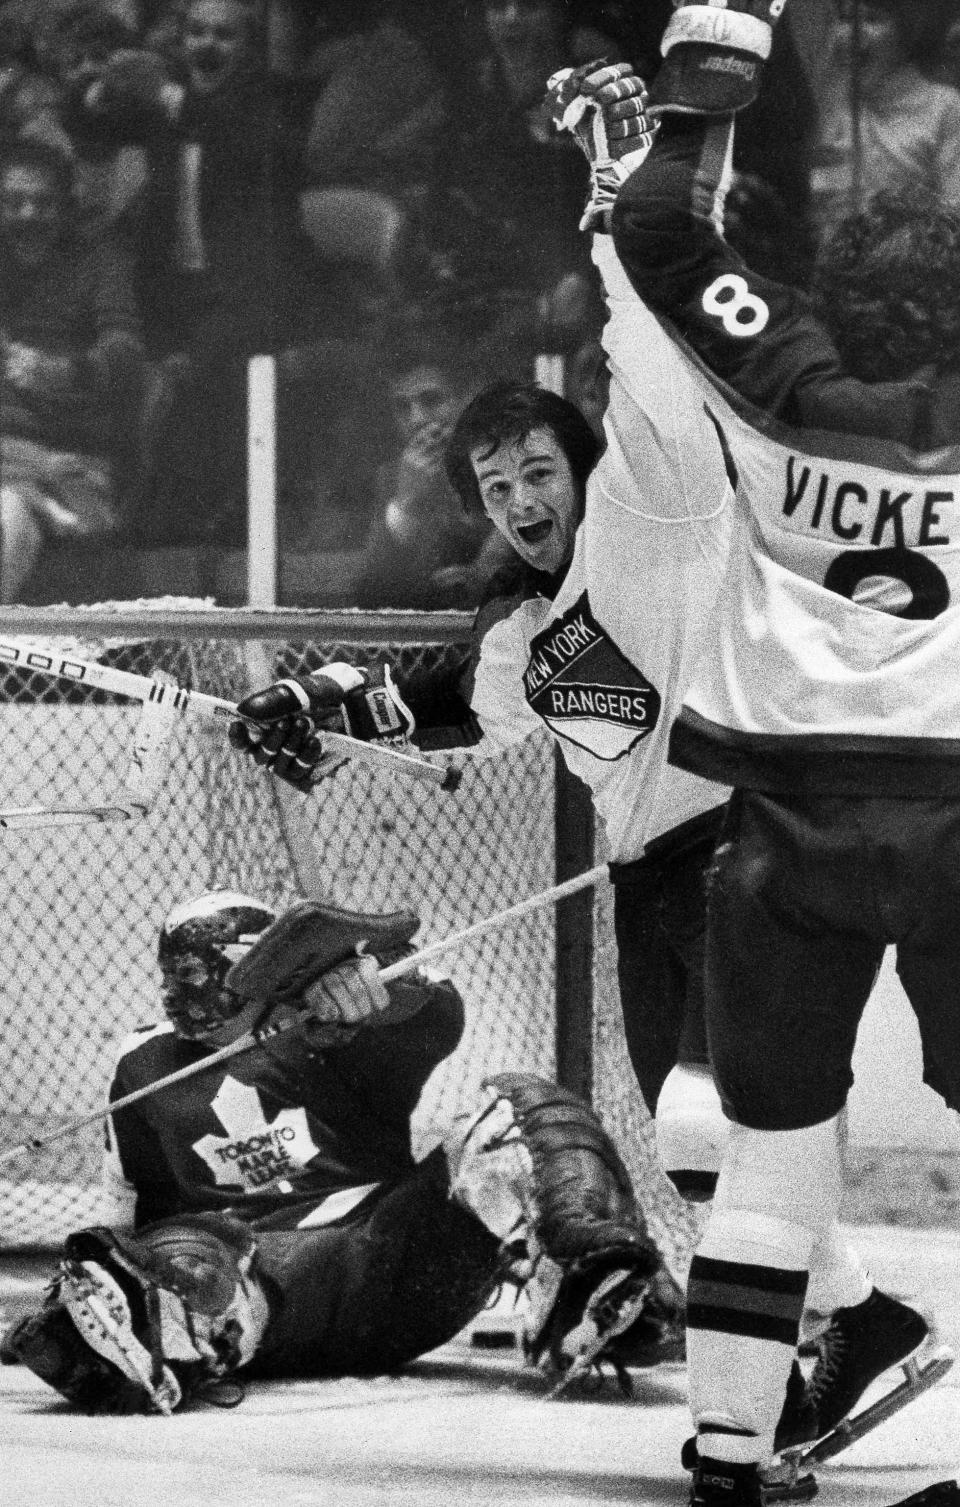 FILE - In this Feb. 14, 1977, file photo, New York Rangers Rod Gilbert, center, and Steve Vickers, right, jubilate after Vickers scored a second-period goal against Toronto Maple Leafs goalie Mike Palmateer, left, at Madison Square Garden in New York. Gilbert, the Hall of Fame right wing who starred for the Rangers and helped Canada win the 1972 Summit Series, had died. He was 80. Gilbert’s family confirmed the death to Rangers on Sunday, Aug. 22, 2021. (AP Photo/Ray Stubblebine, File)